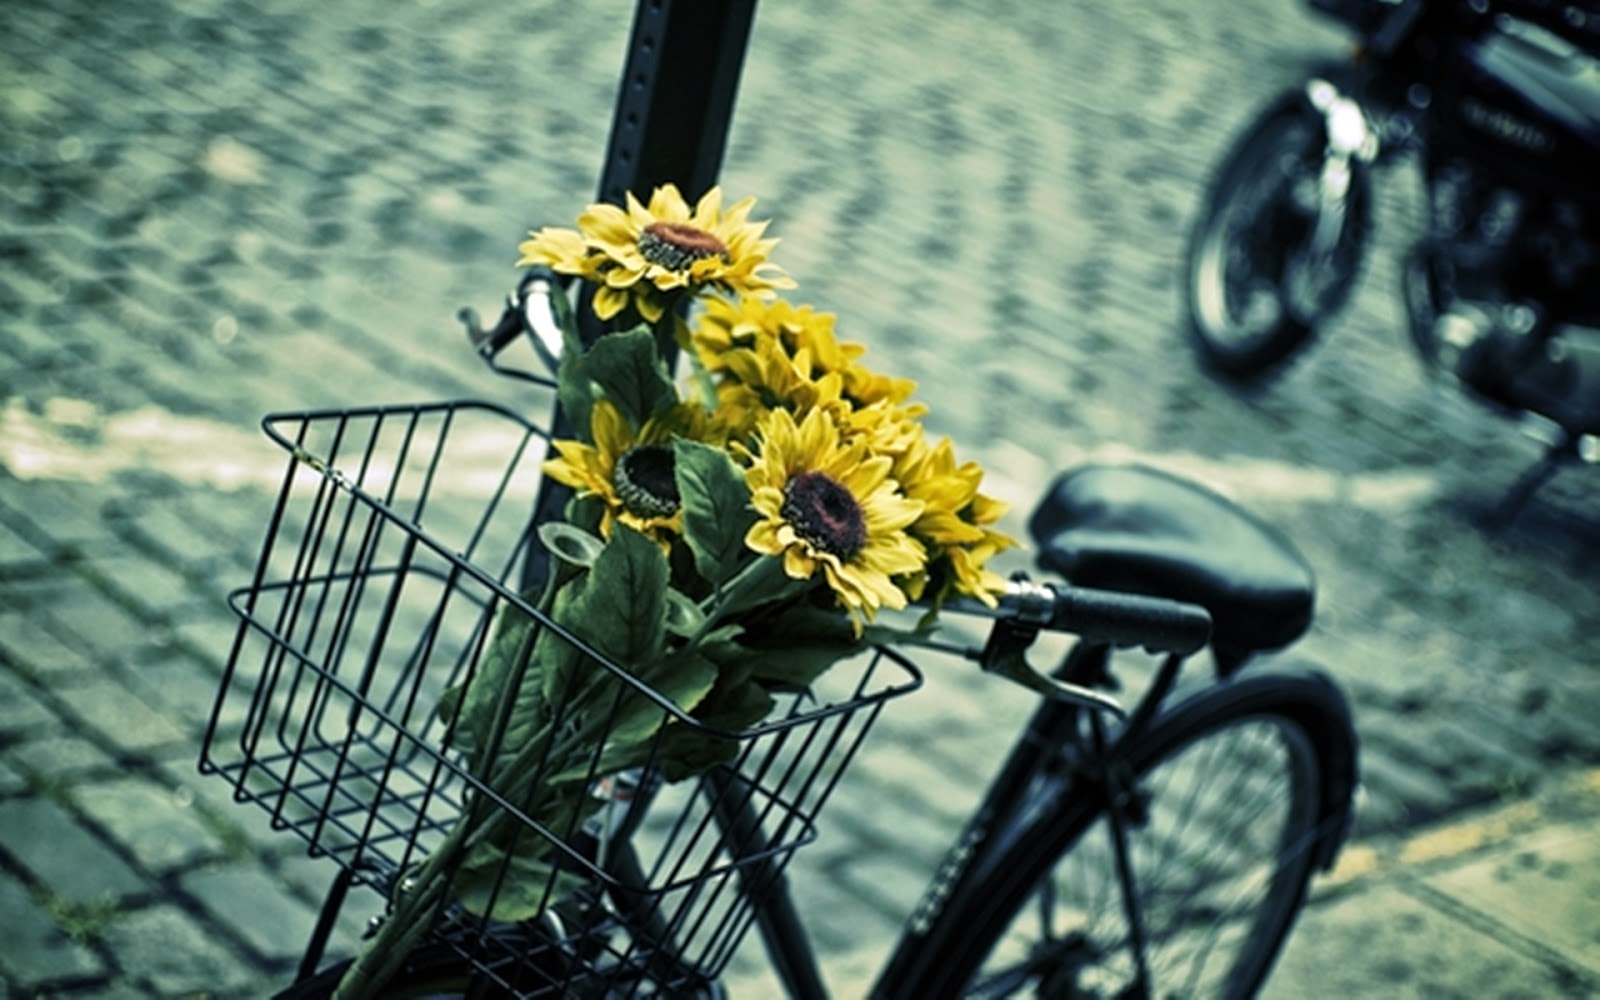 Bicycle with flower wallpapers photo 2014-2015 ~ Charming collection of